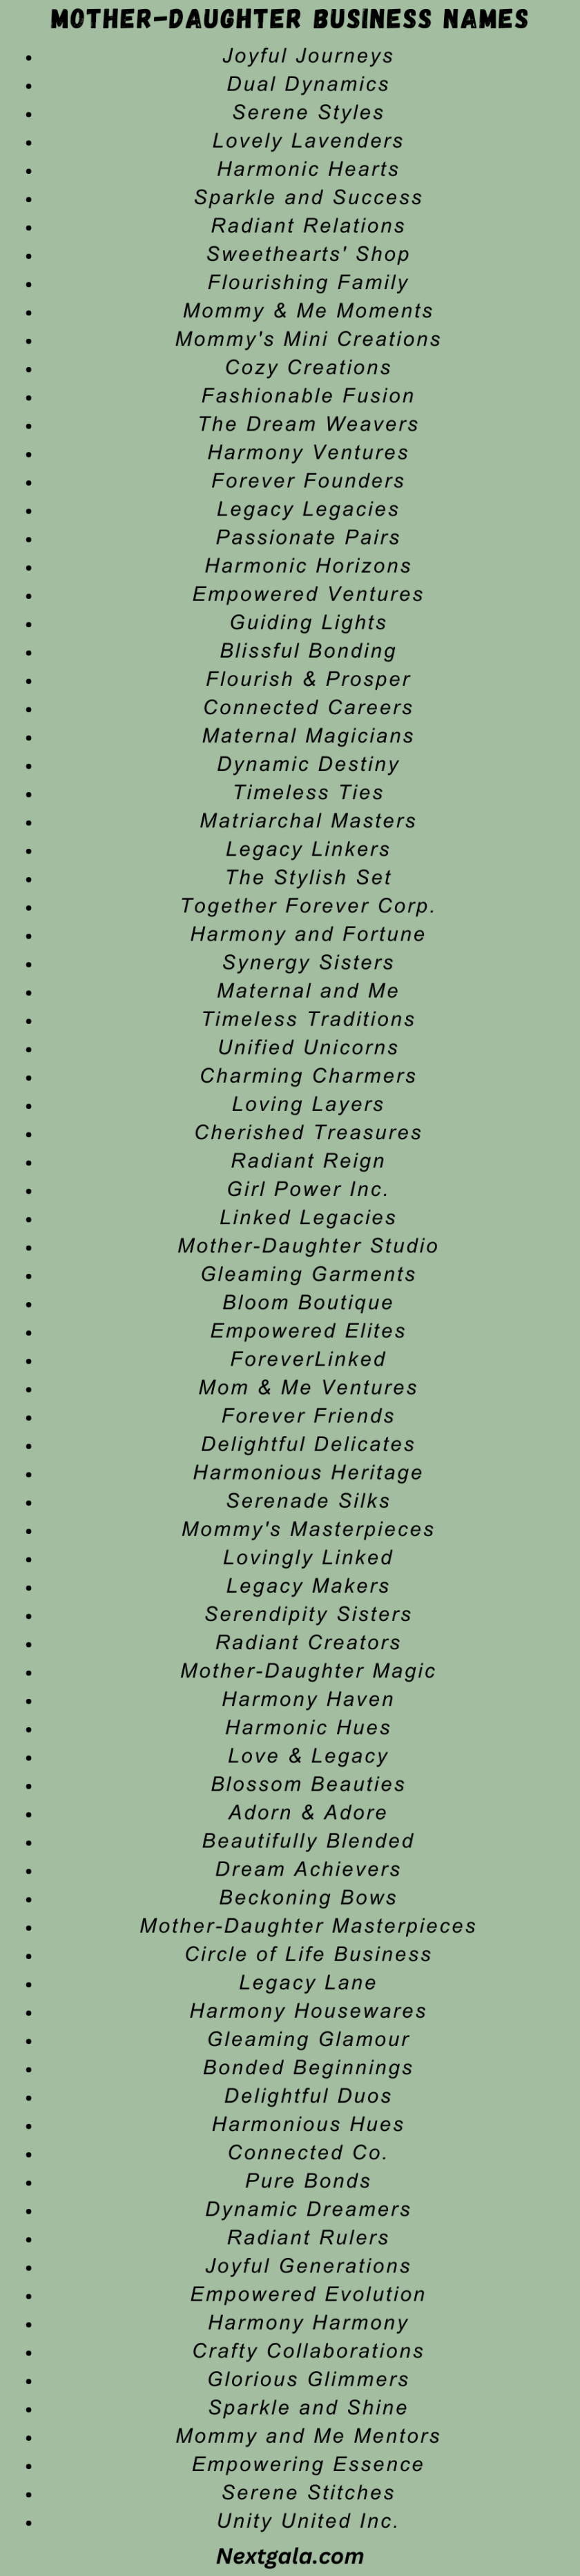 Mother-Daughter Business Names